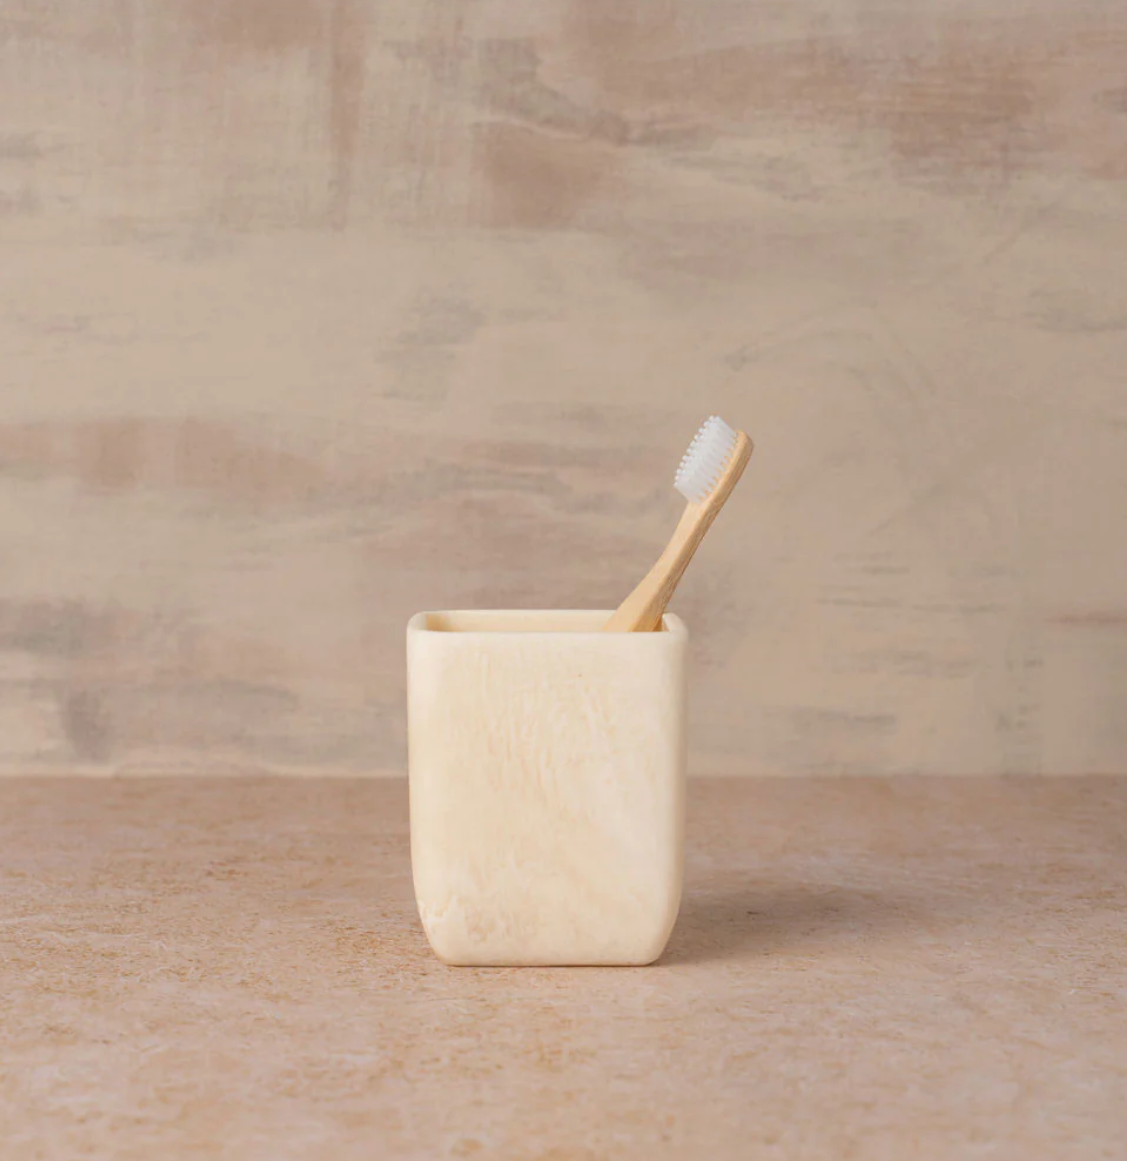 Flow Resin Toothbrush Holder | Marshmallow The Marshmallow Flow Resin Toothbrush Holder is distinctive and organic with its curved lines and marble finish. Each toothbrush holder is handmade and no two patterns are the same.  